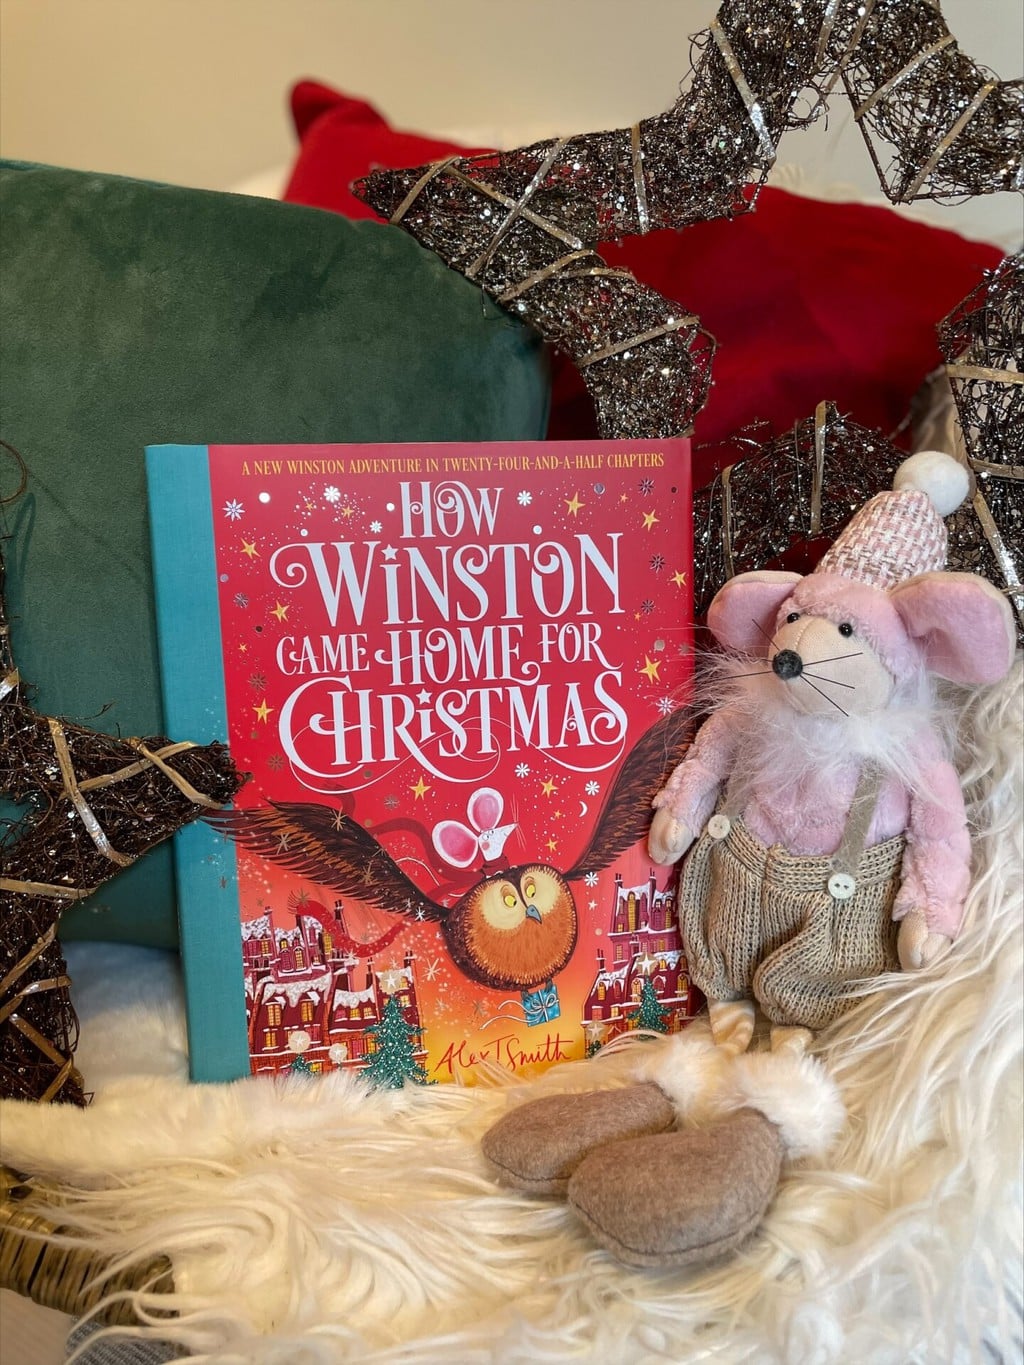 How Winston Came Home for Christmas – Alex T Smith (author and illustrator), MacMillan Children’s Books (publisher)